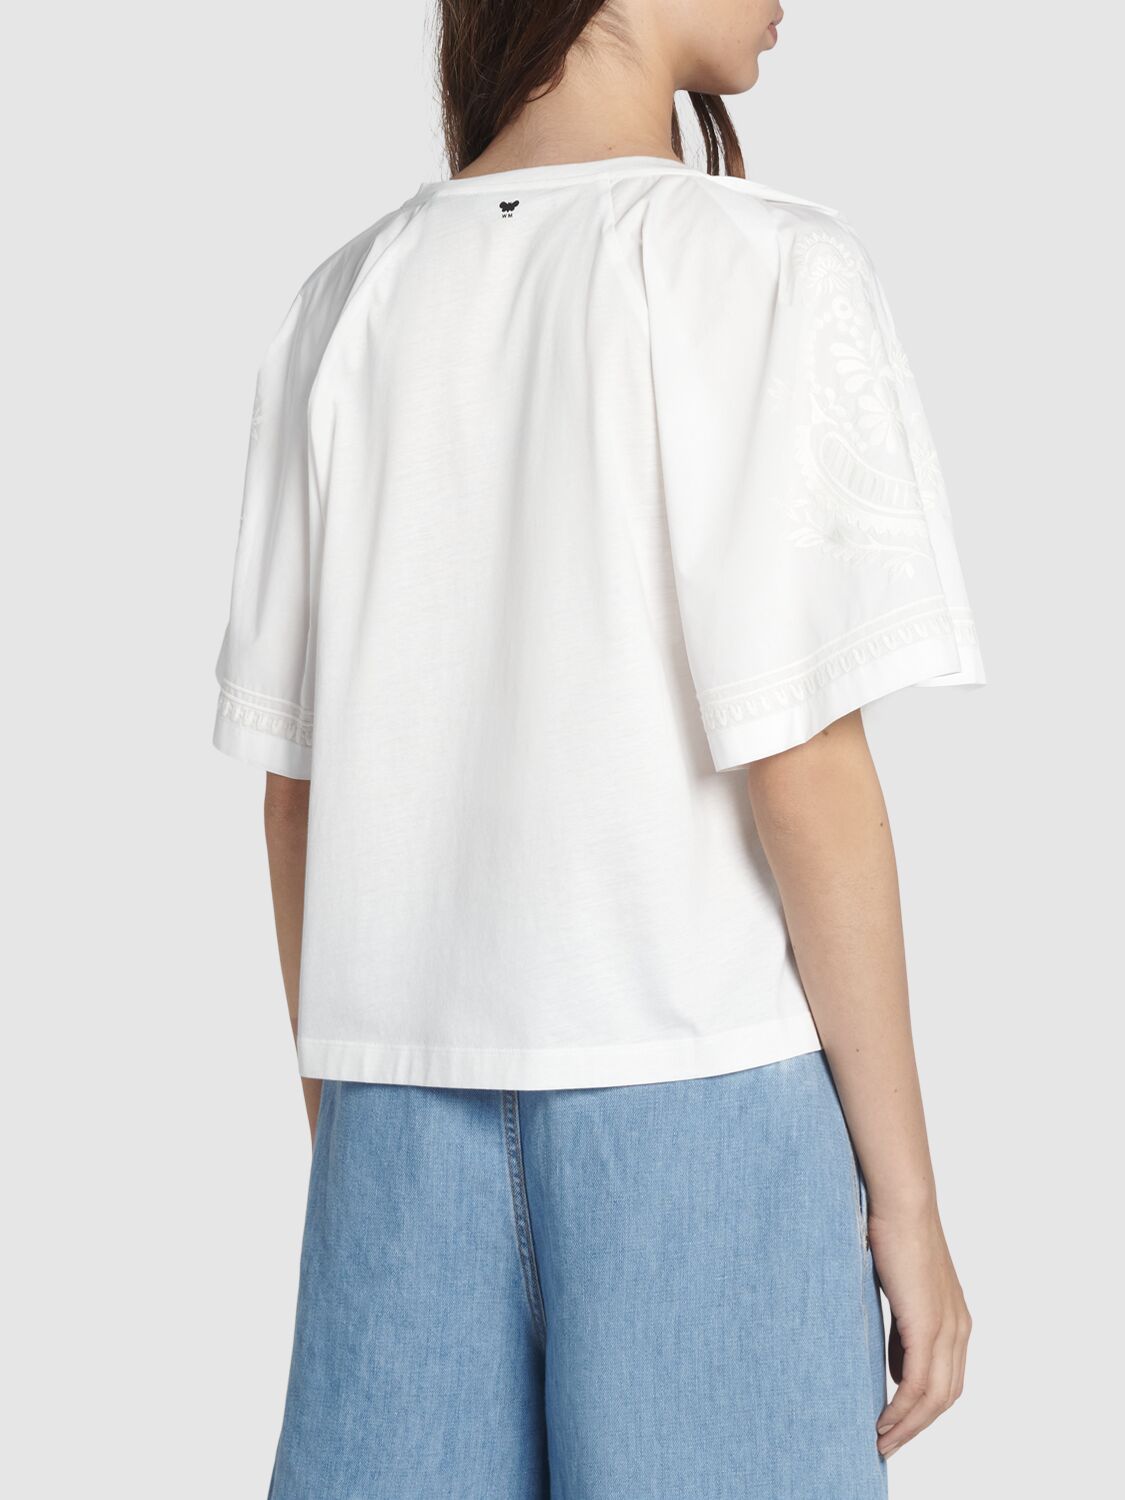 Shop Weekend Max Mara Livorno Cotton Jersey Top W/embroidery In White